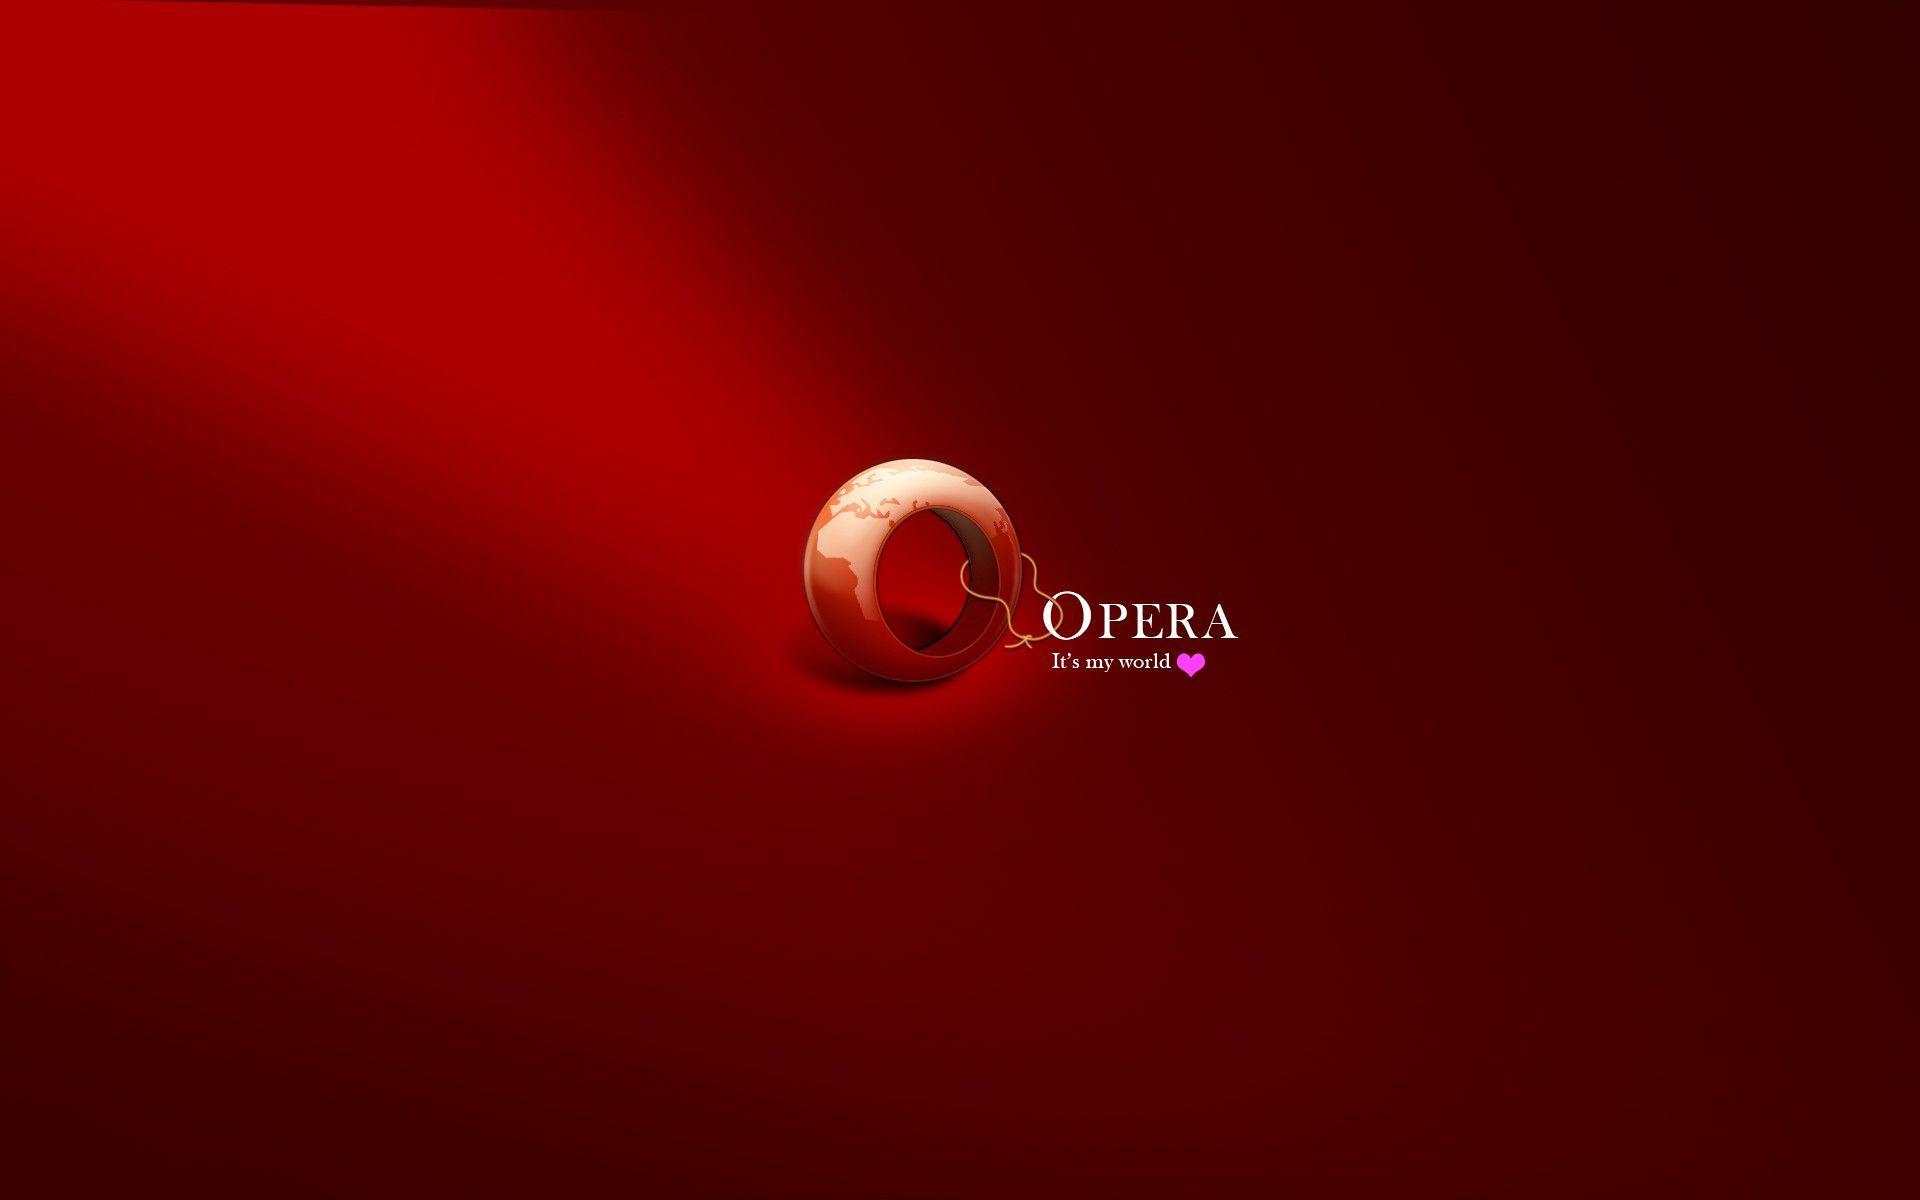 Opera GX the worlds first gaming browser is now on Mac  Blog  Opera  Desktop